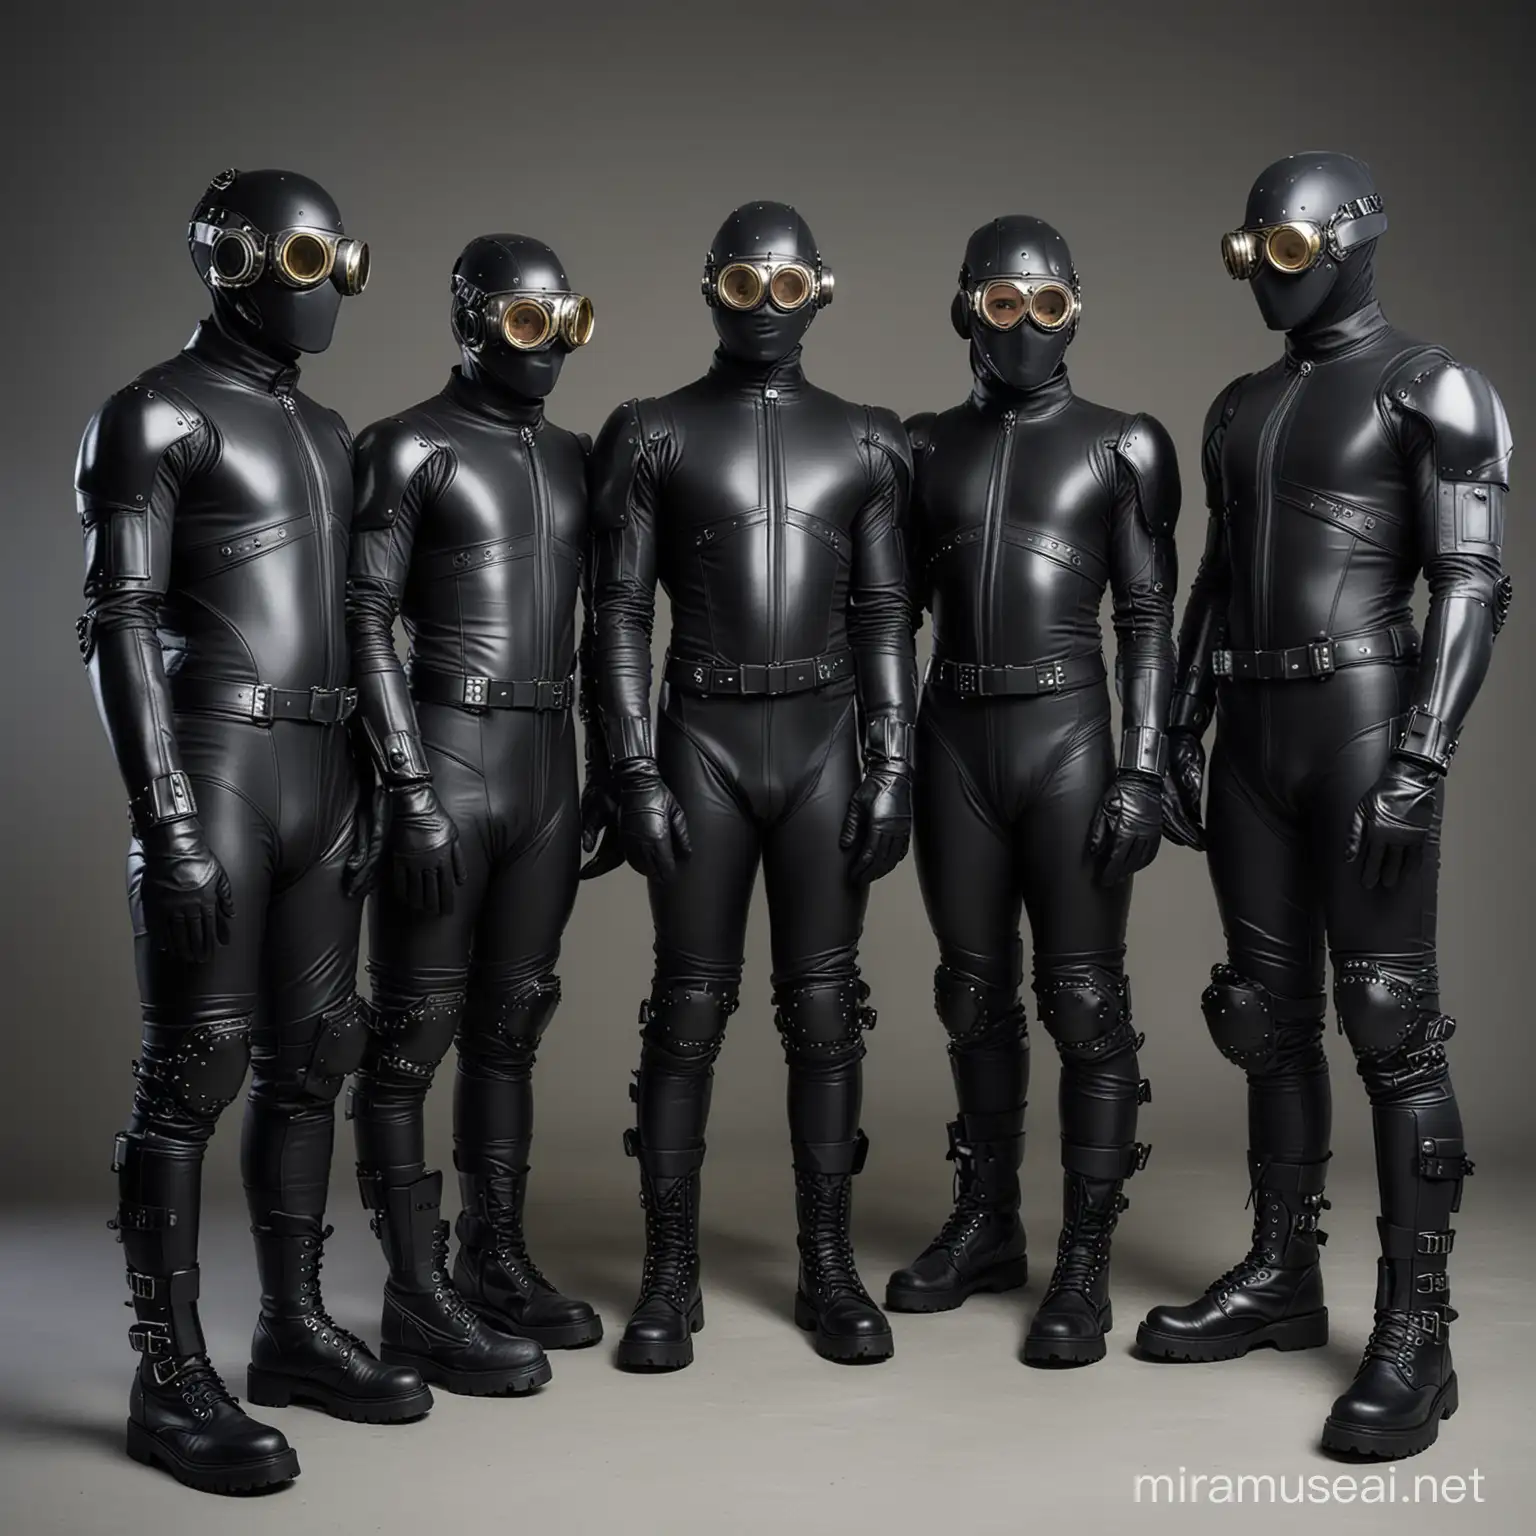 create a full-length photo of 3 athletic males aged 20 with fully shaved heads wearing black full-body skinsuits and black gloves. Their bodies are covered with a grey robotic metal exoskeleton and silicone circuitry. Lab technicians are fitting an Airsoft Helmet Set with Night Vision Goggles onto each of their heads. On their feet and legs they are wearing Steam 20 Unisex Black 20 Eyelet Steampunk 5 Strap boots. Each male is standing on a round platform.